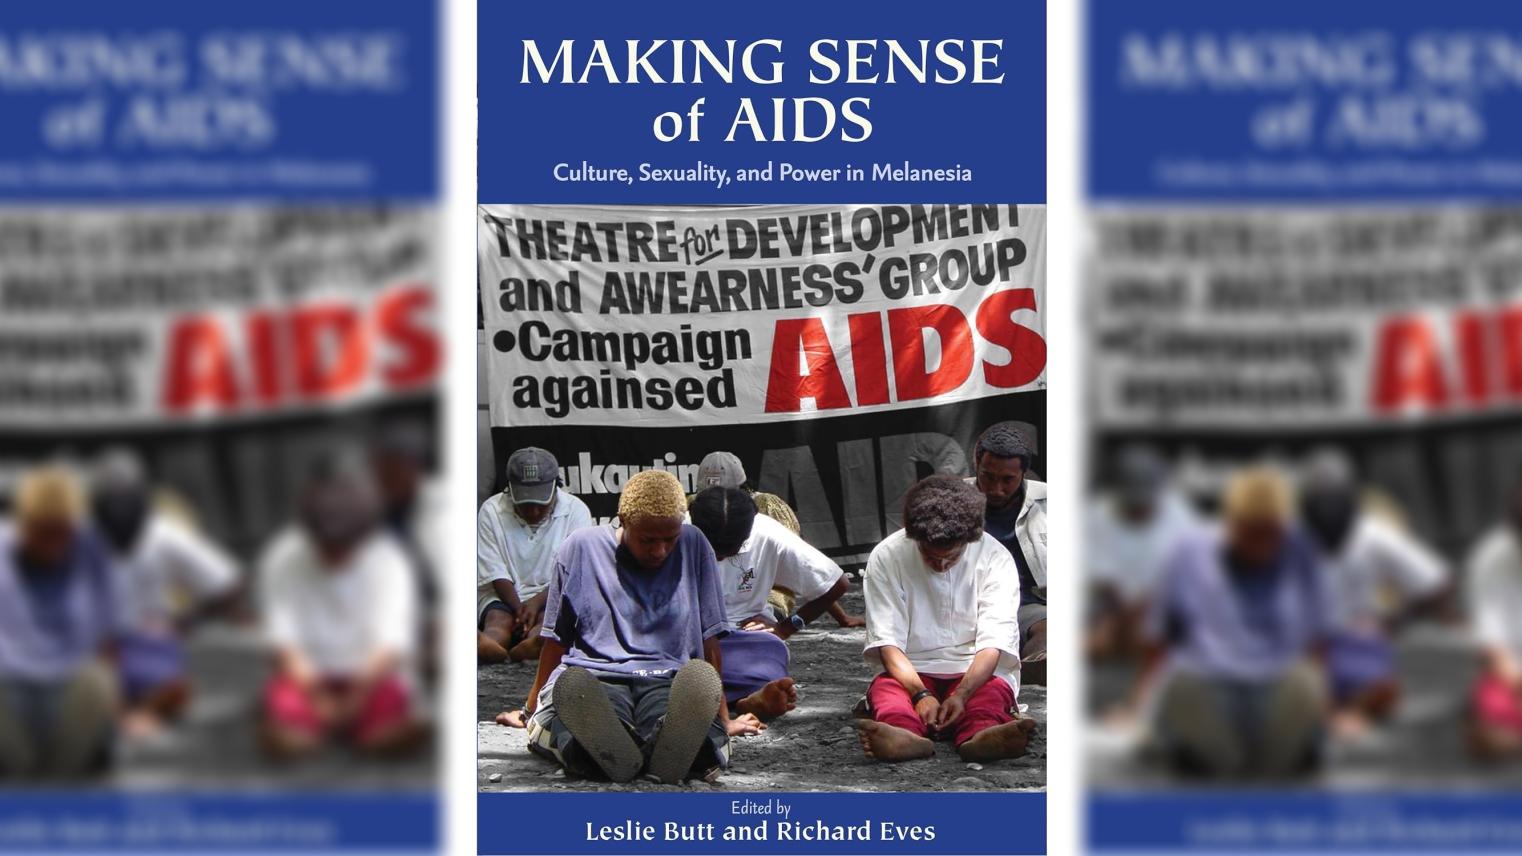 Making Sense of AIDS: Culture, Sexuality, and Power in Melanesia